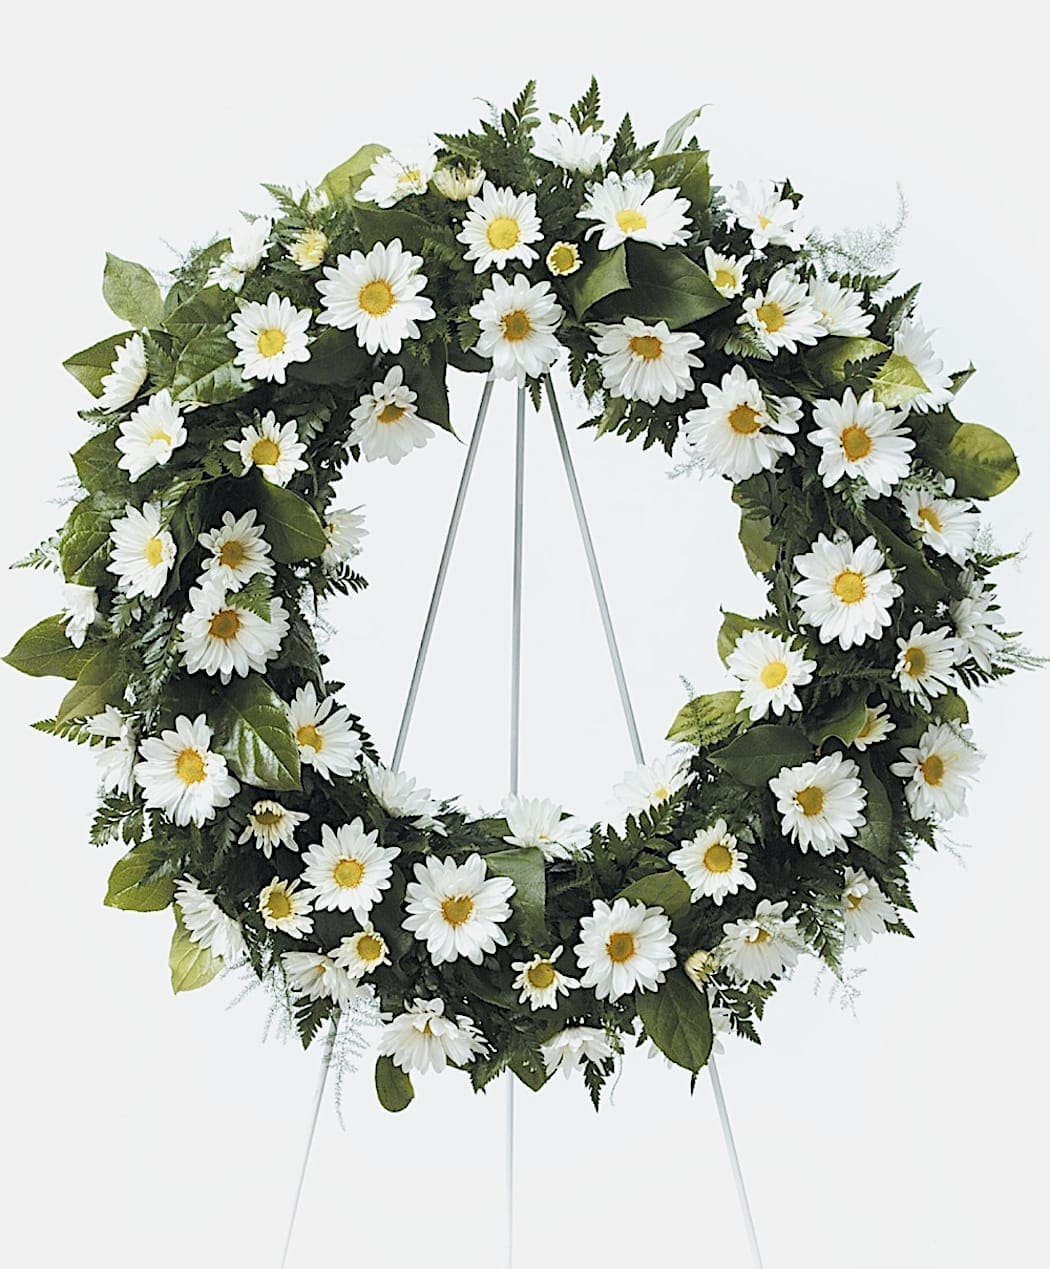 Field of Daisy Wreath - Large round wreath filled with white daisies. Other color options may be available.